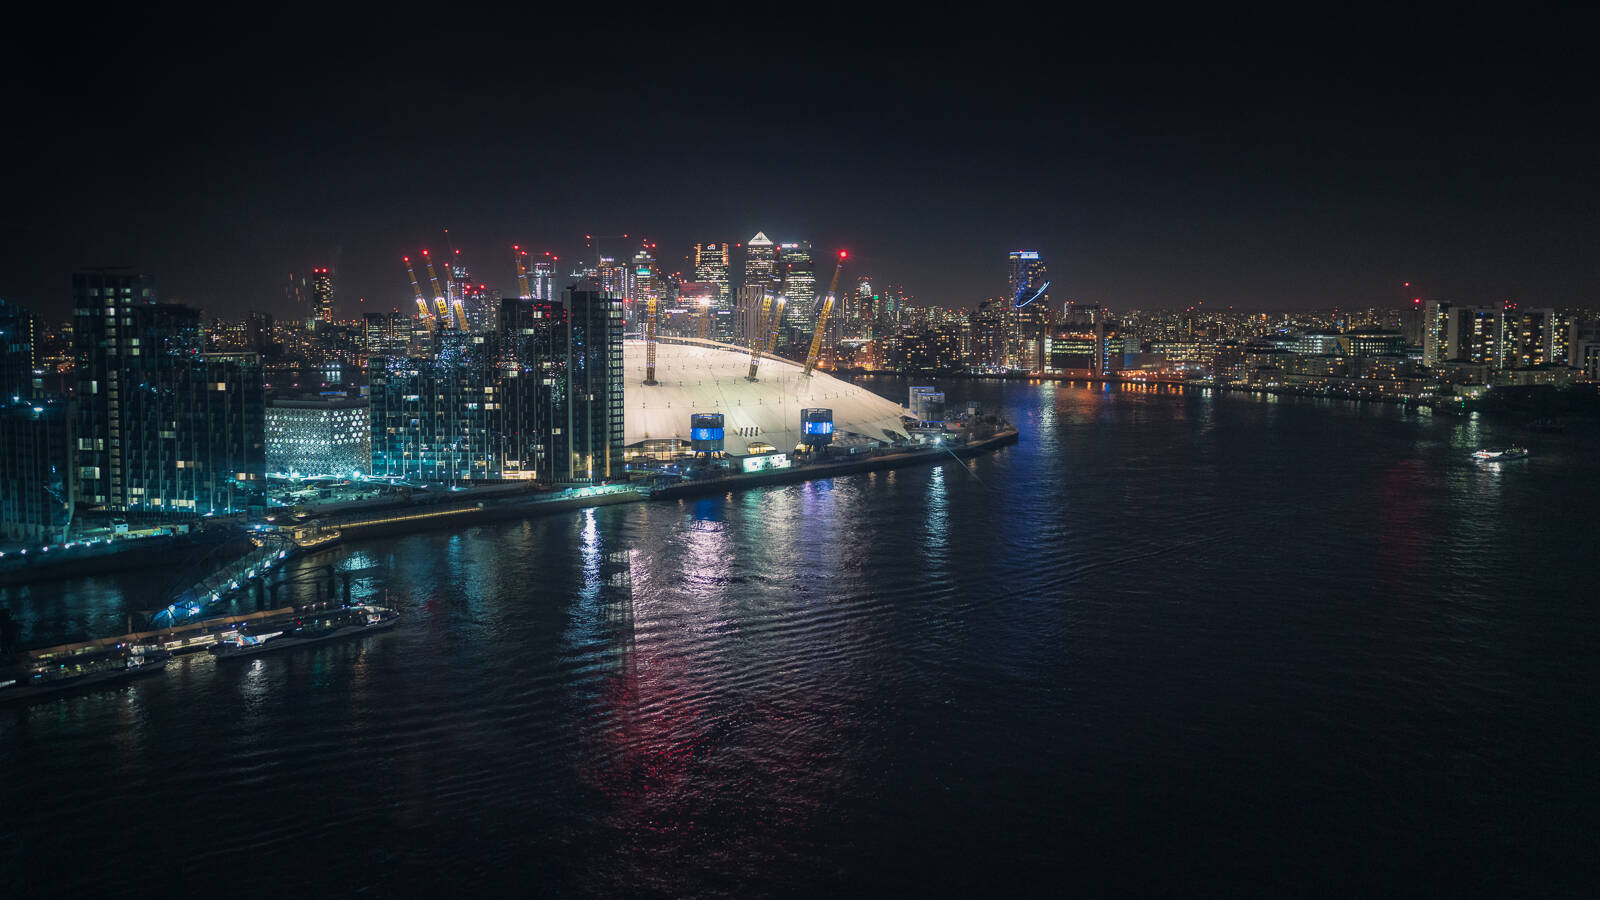 Image of Emirates Cable Car by James Billings.